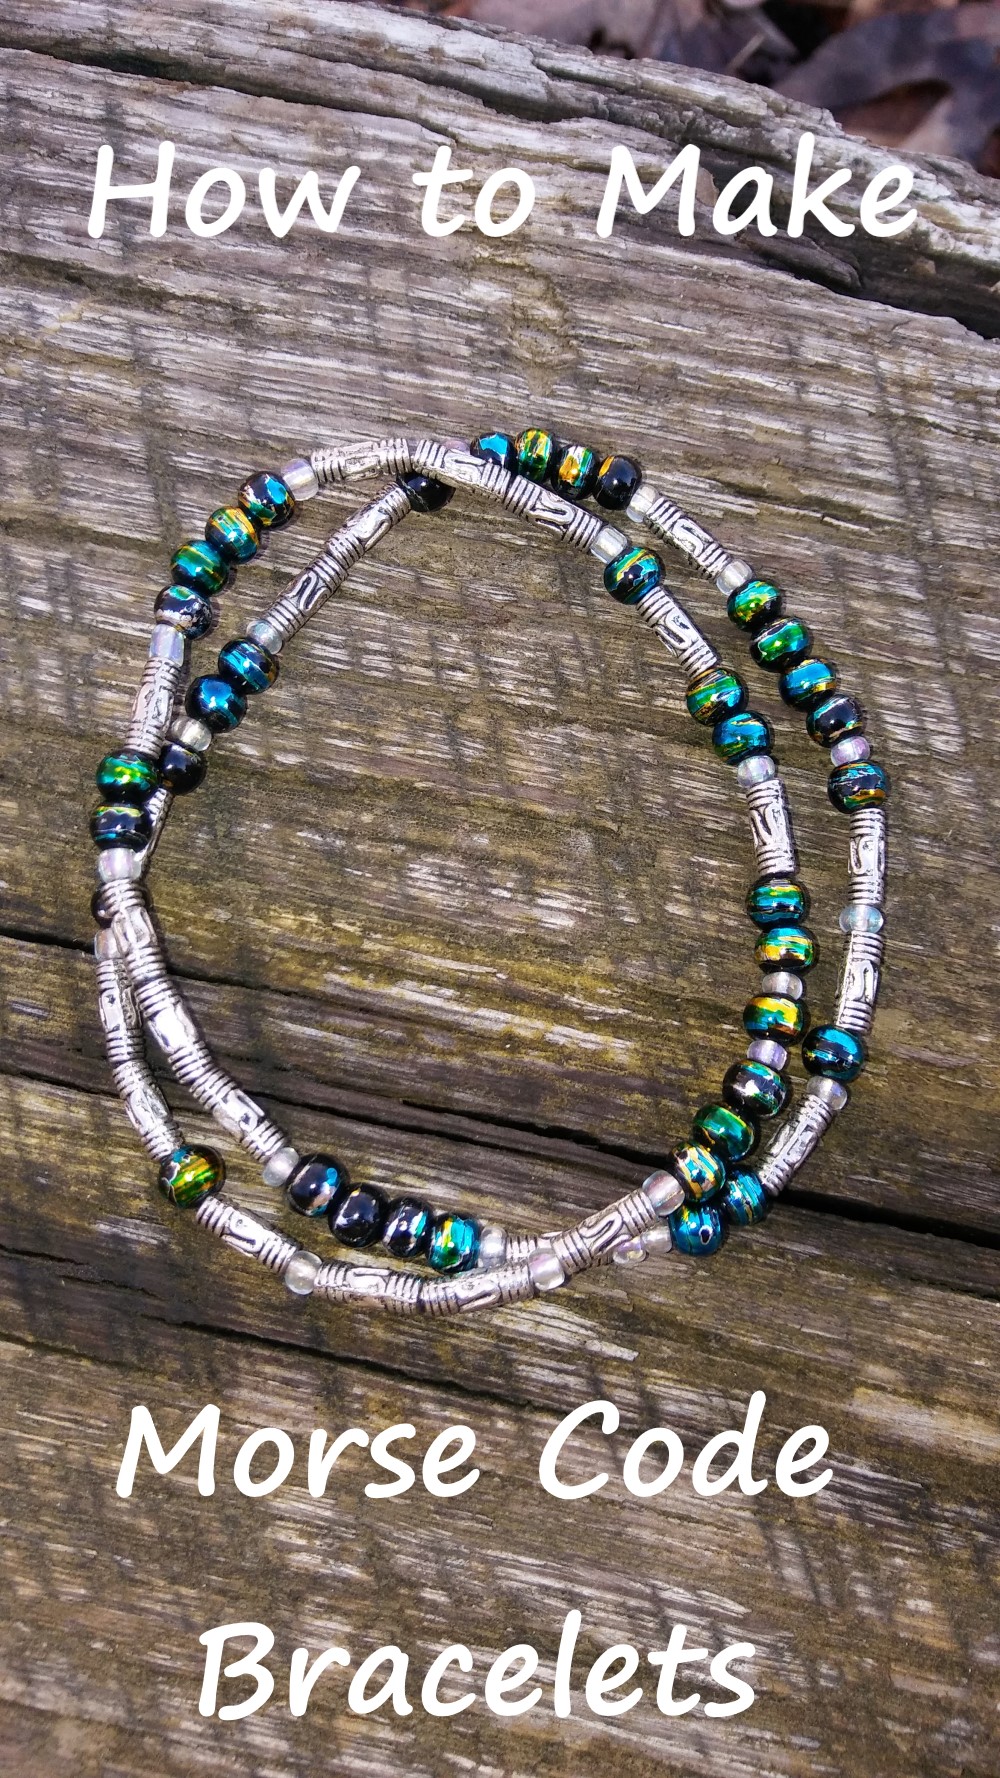 bracelet made from teal glass beads and silver tube beads with text overlay: how to make morse code bracelets